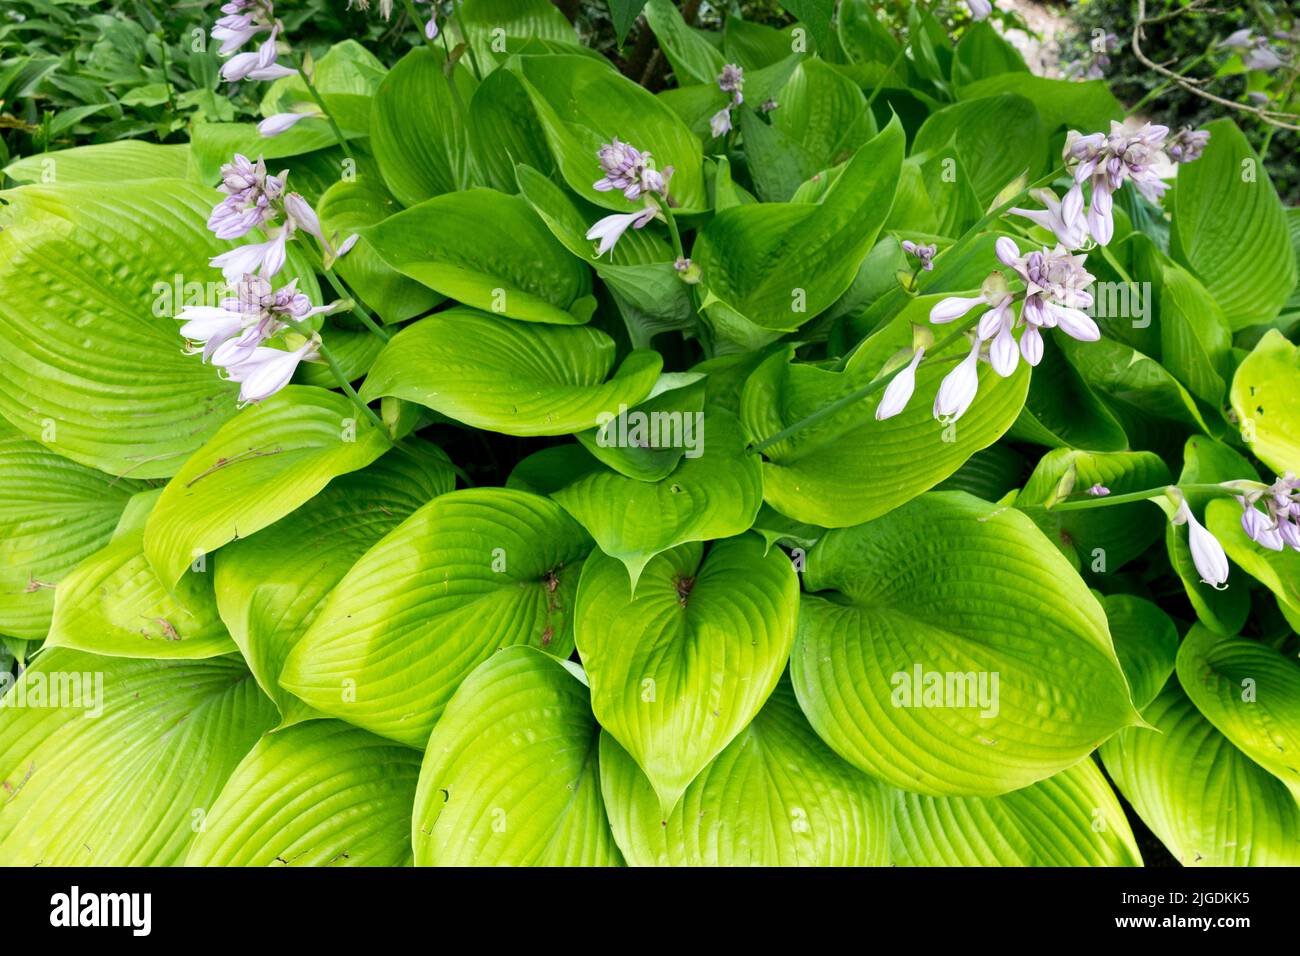 Large, Leaves, Hosta 'Sum and Substance', Blooming in Garden Stock Photo